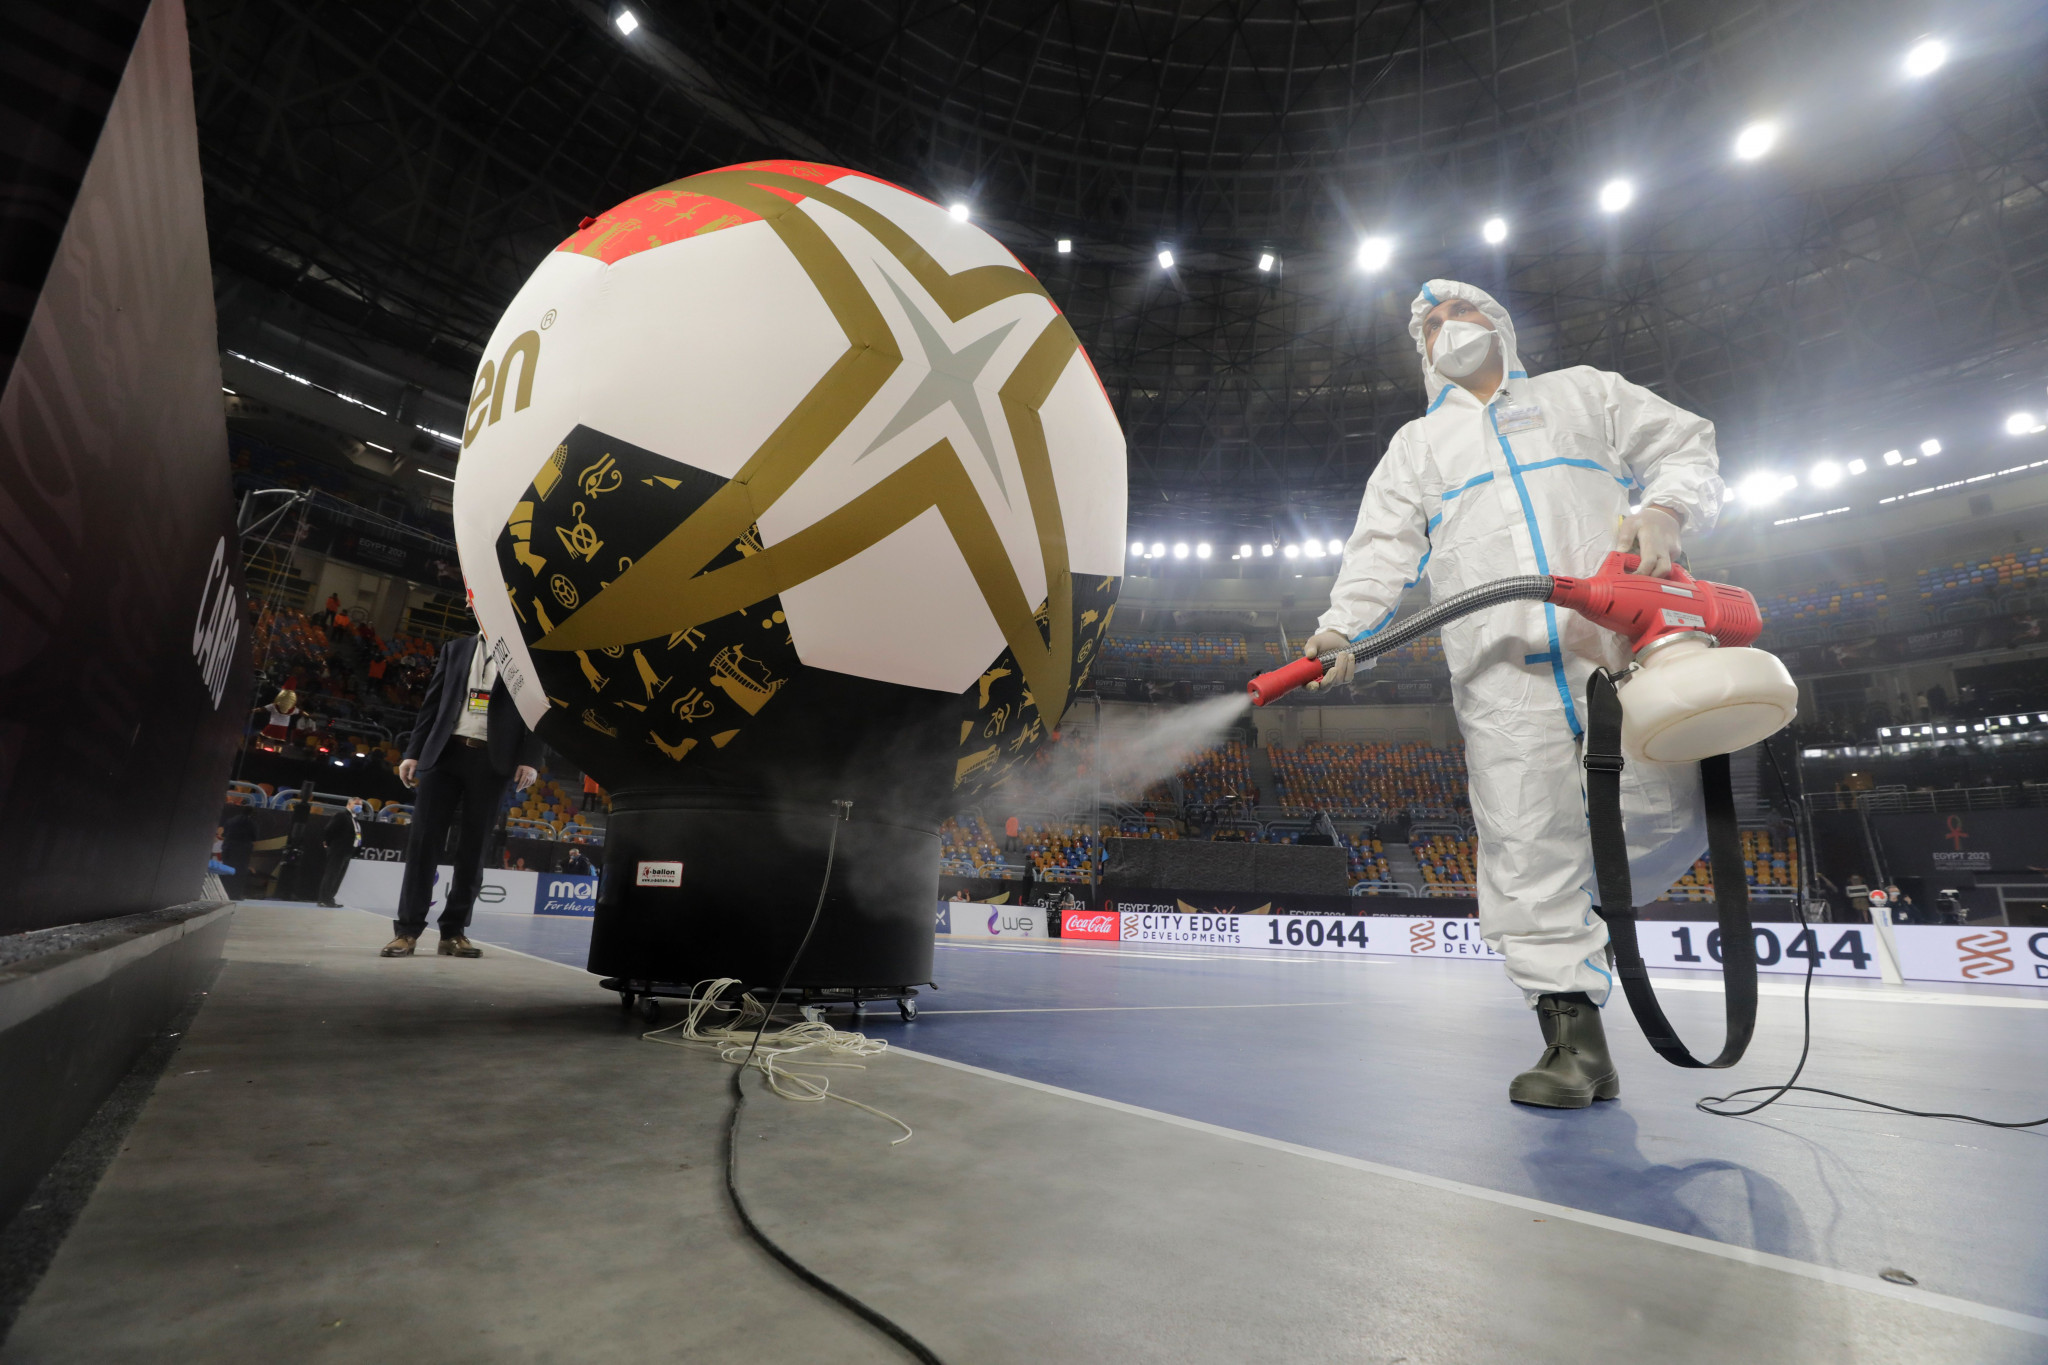 The IHF World Championship took place in Cairo under strict COVID-19 protocols to ensure players and officials were kept safe ©Getty Images